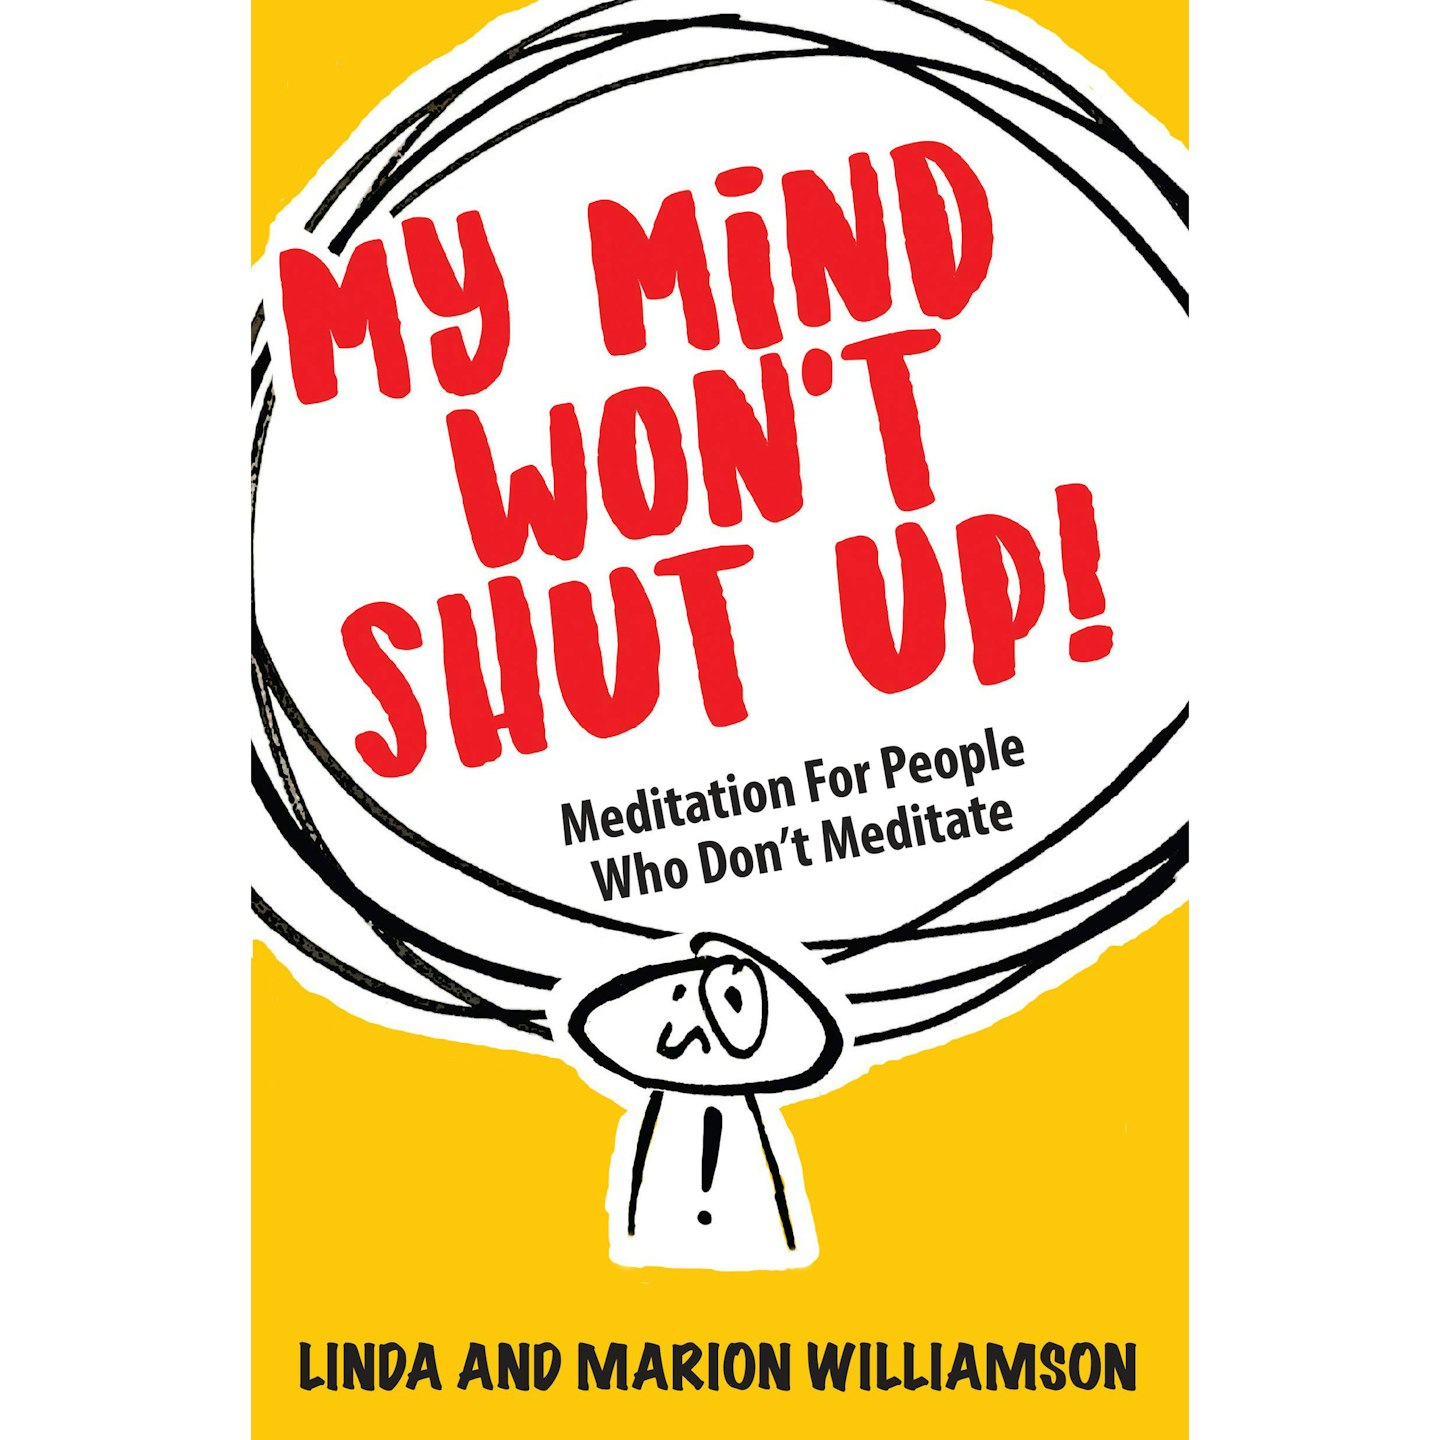 My Mind Wonu2019t Shut Up! Meditation For People Who Donu2019t Meditate by Linda and Marion Williamson